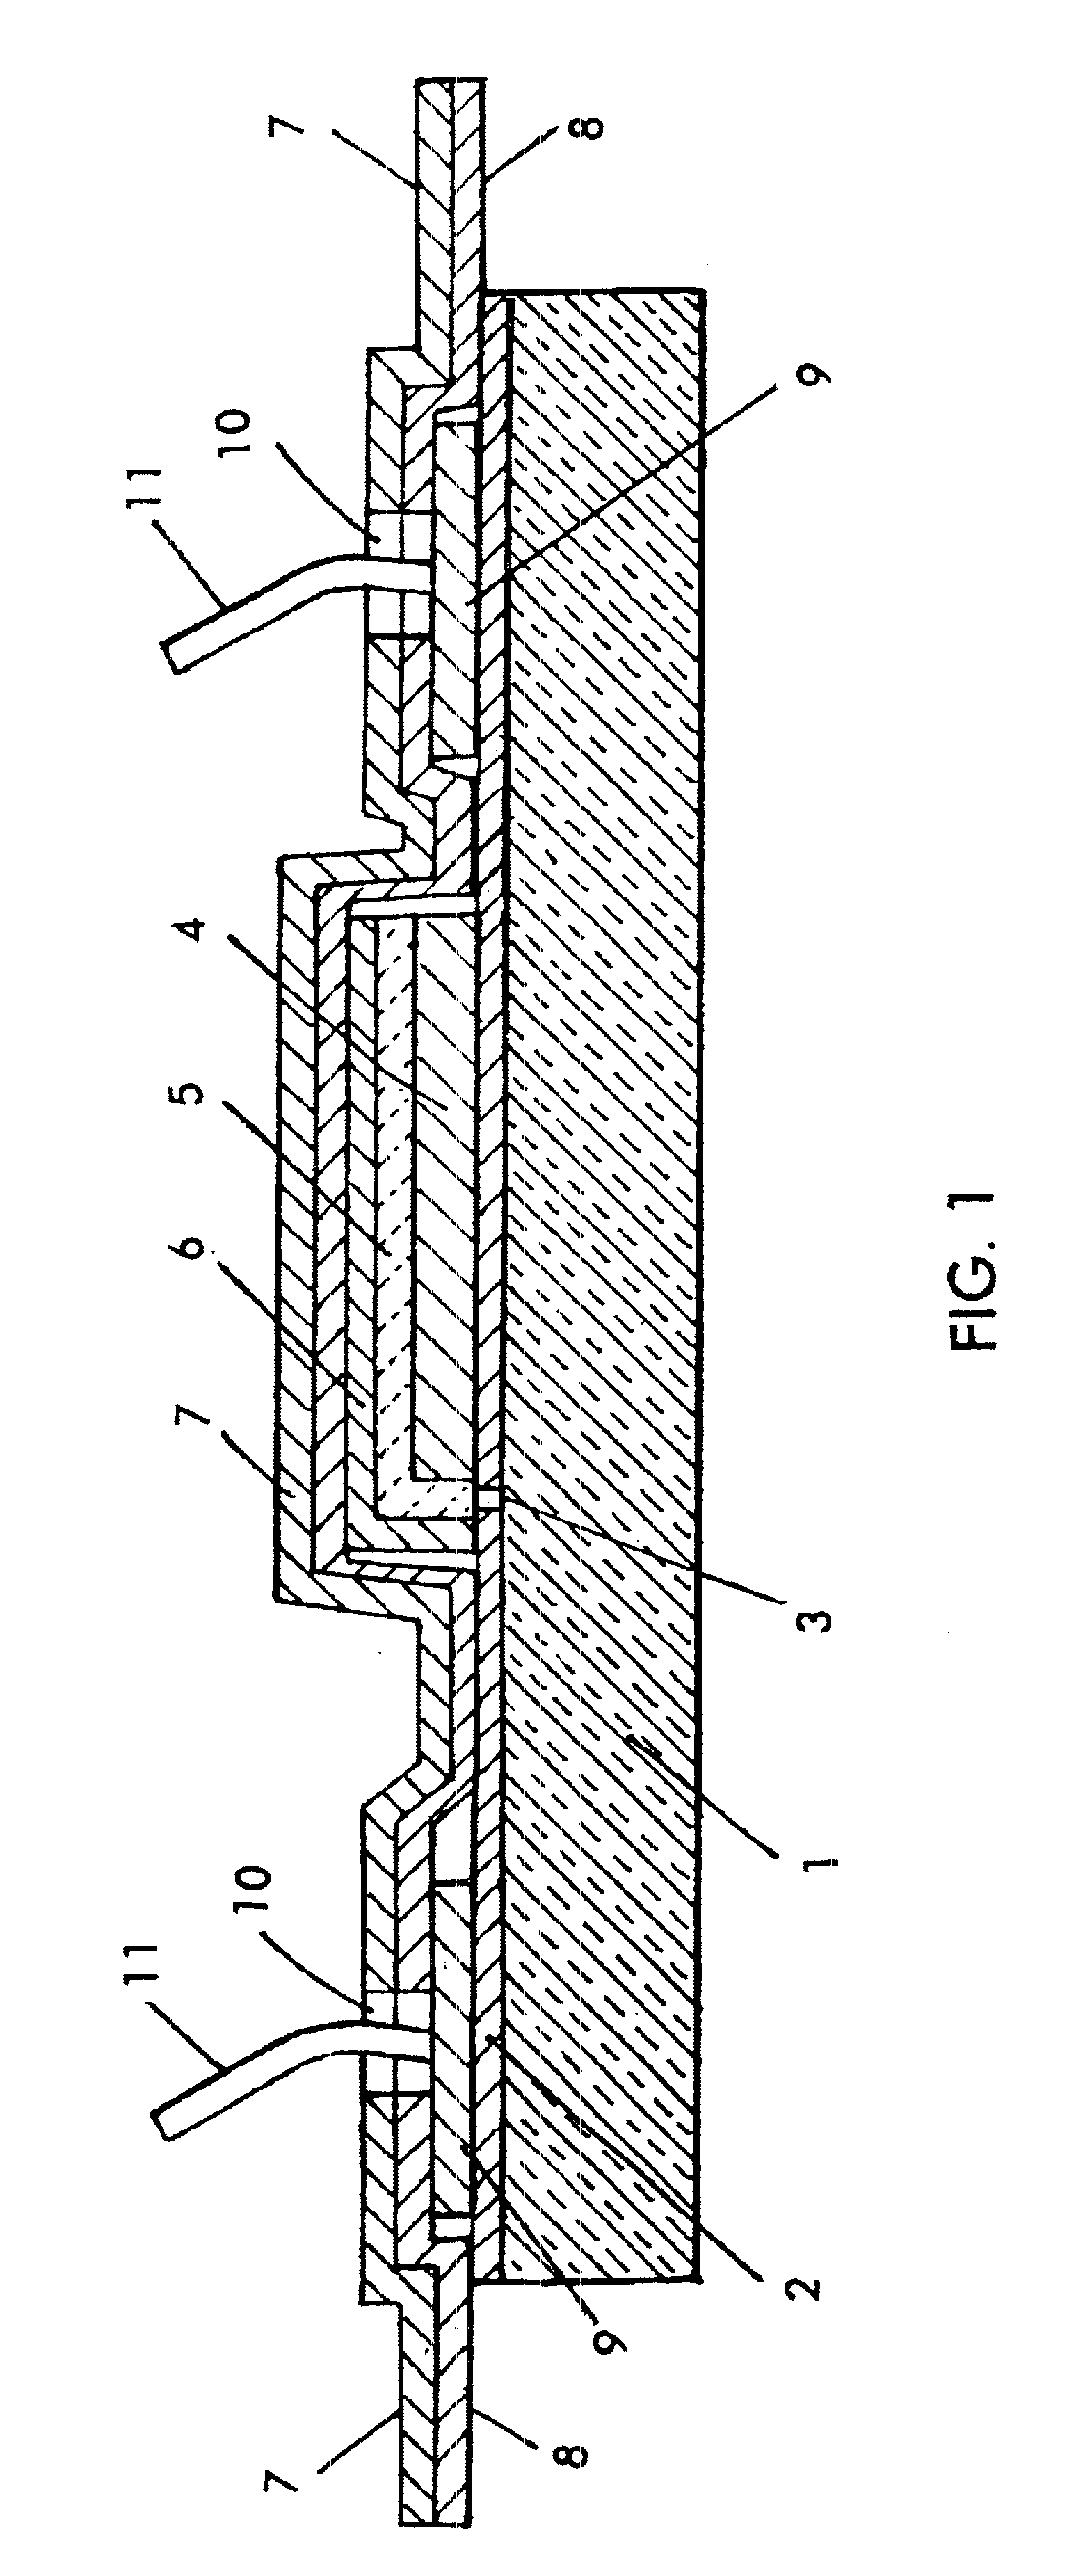 Method to implement sealing and electrical connections to single cell and multi-cell regenerative photoelectrochemical devices